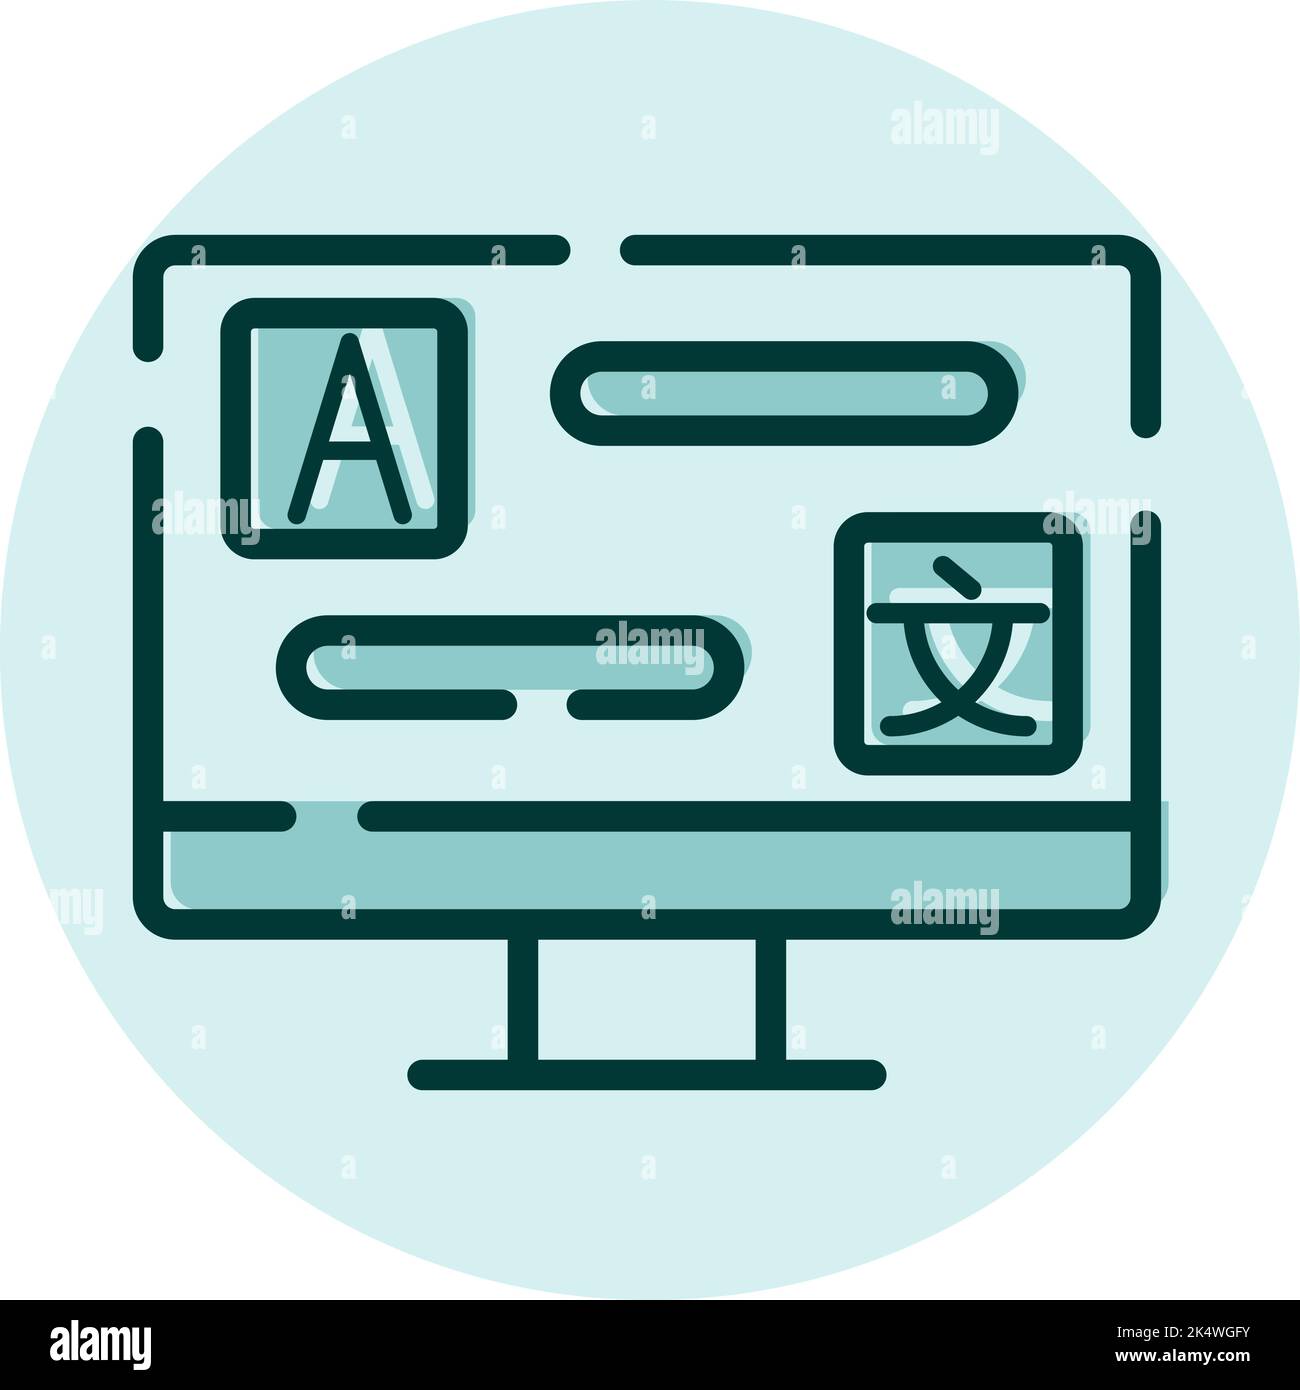 Online dictionary, illustration, vector on a white background. Stock Vector